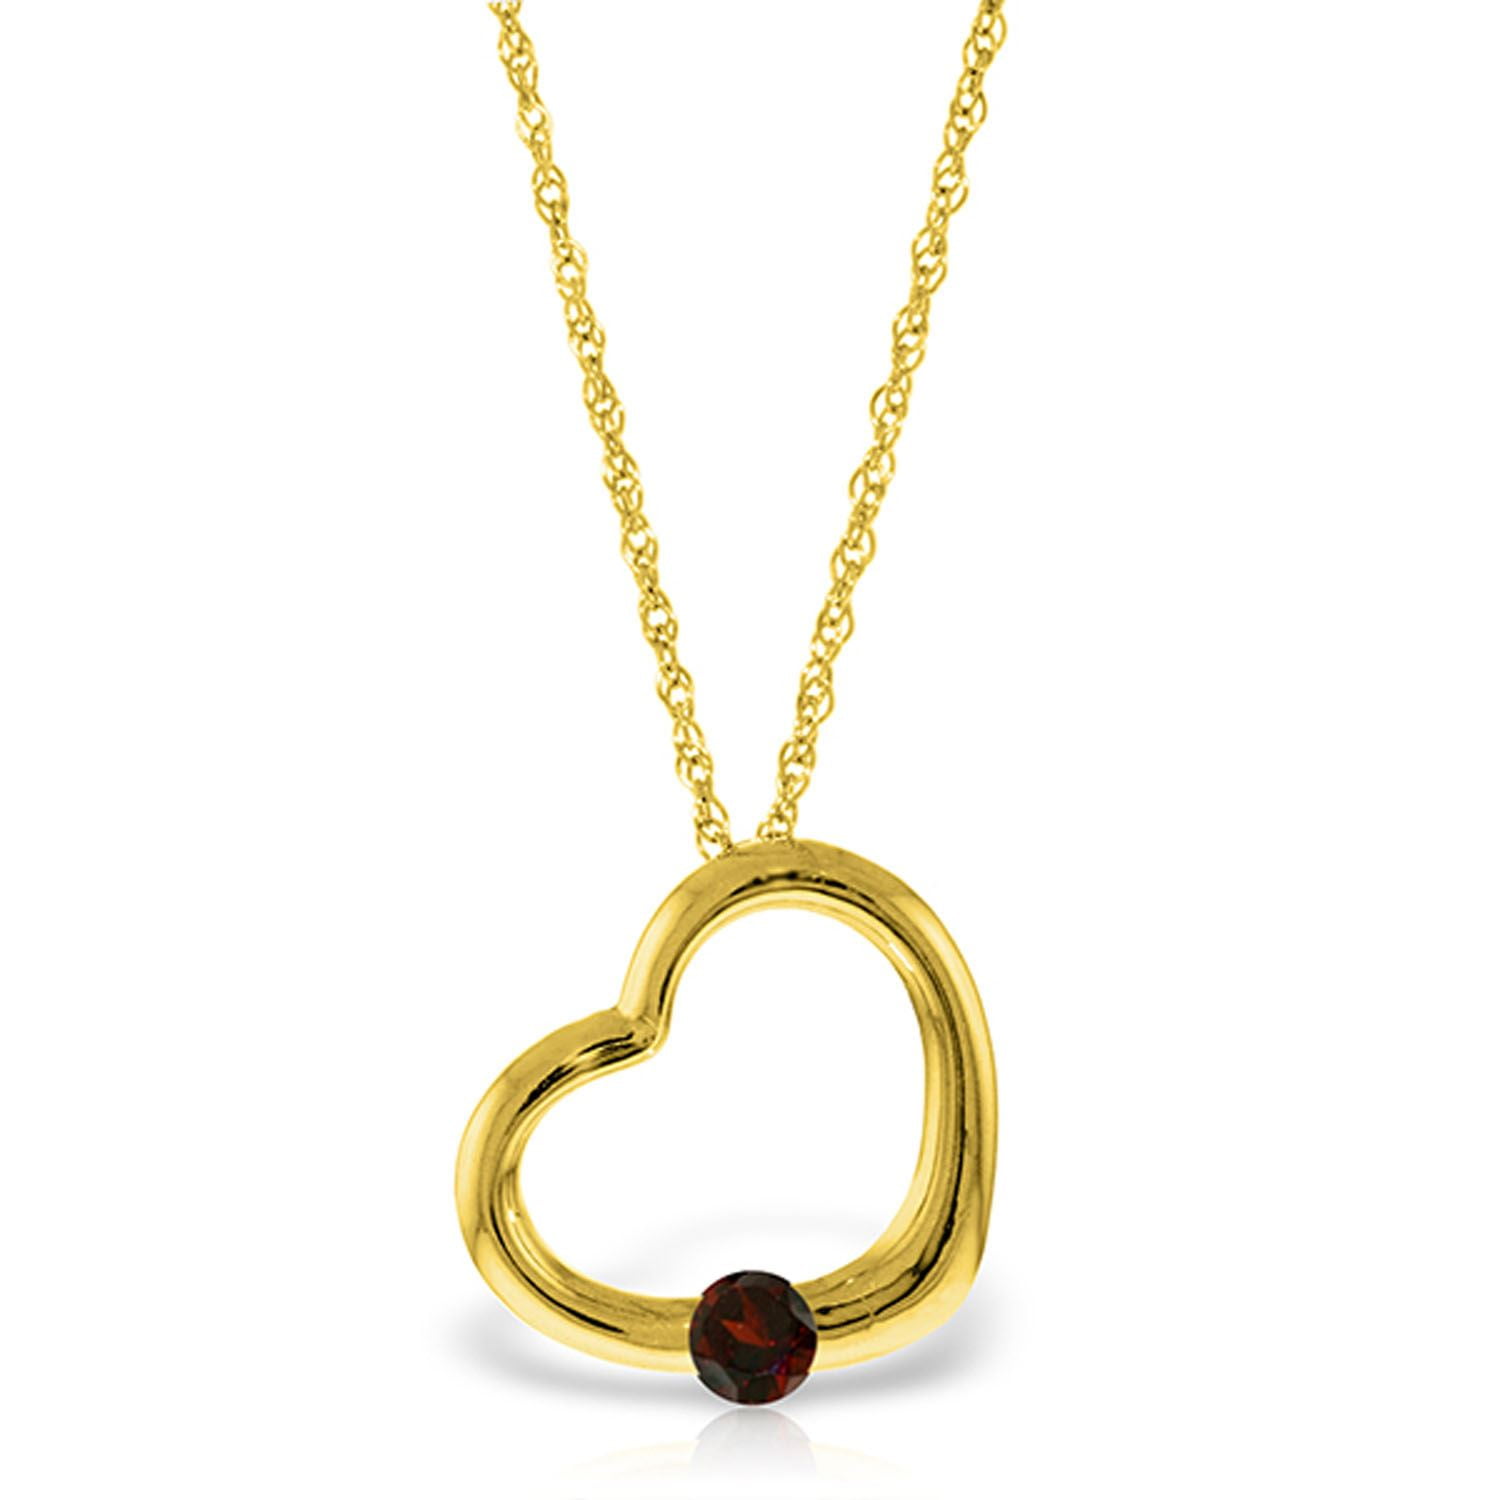 ALARRI 14K Solid Rose Gold Heart Necklace w/ Dangling Natural Garnet with 20 Inch Chain Length